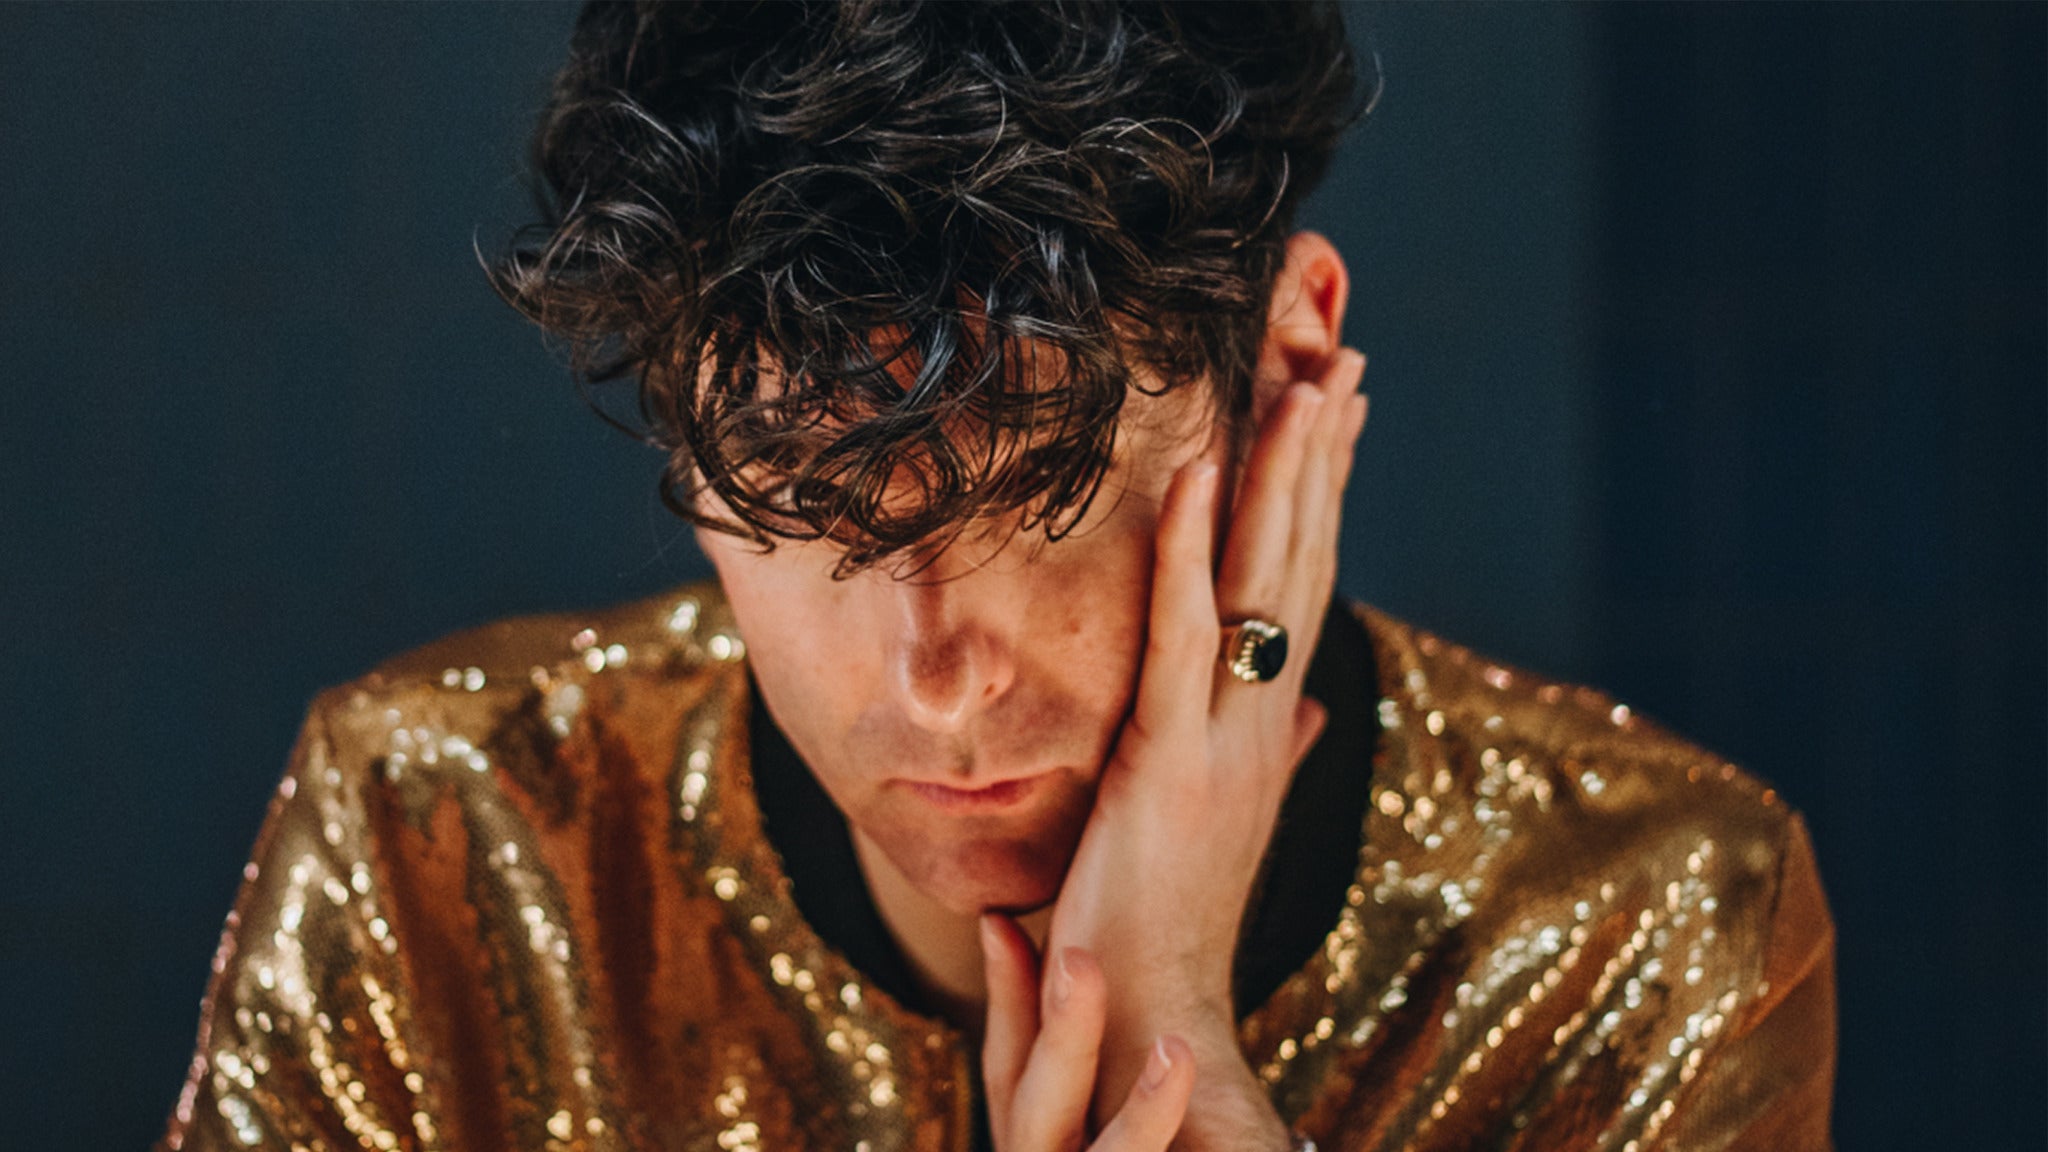 Low Cut Connie presale password for early tickets in Asbury Park